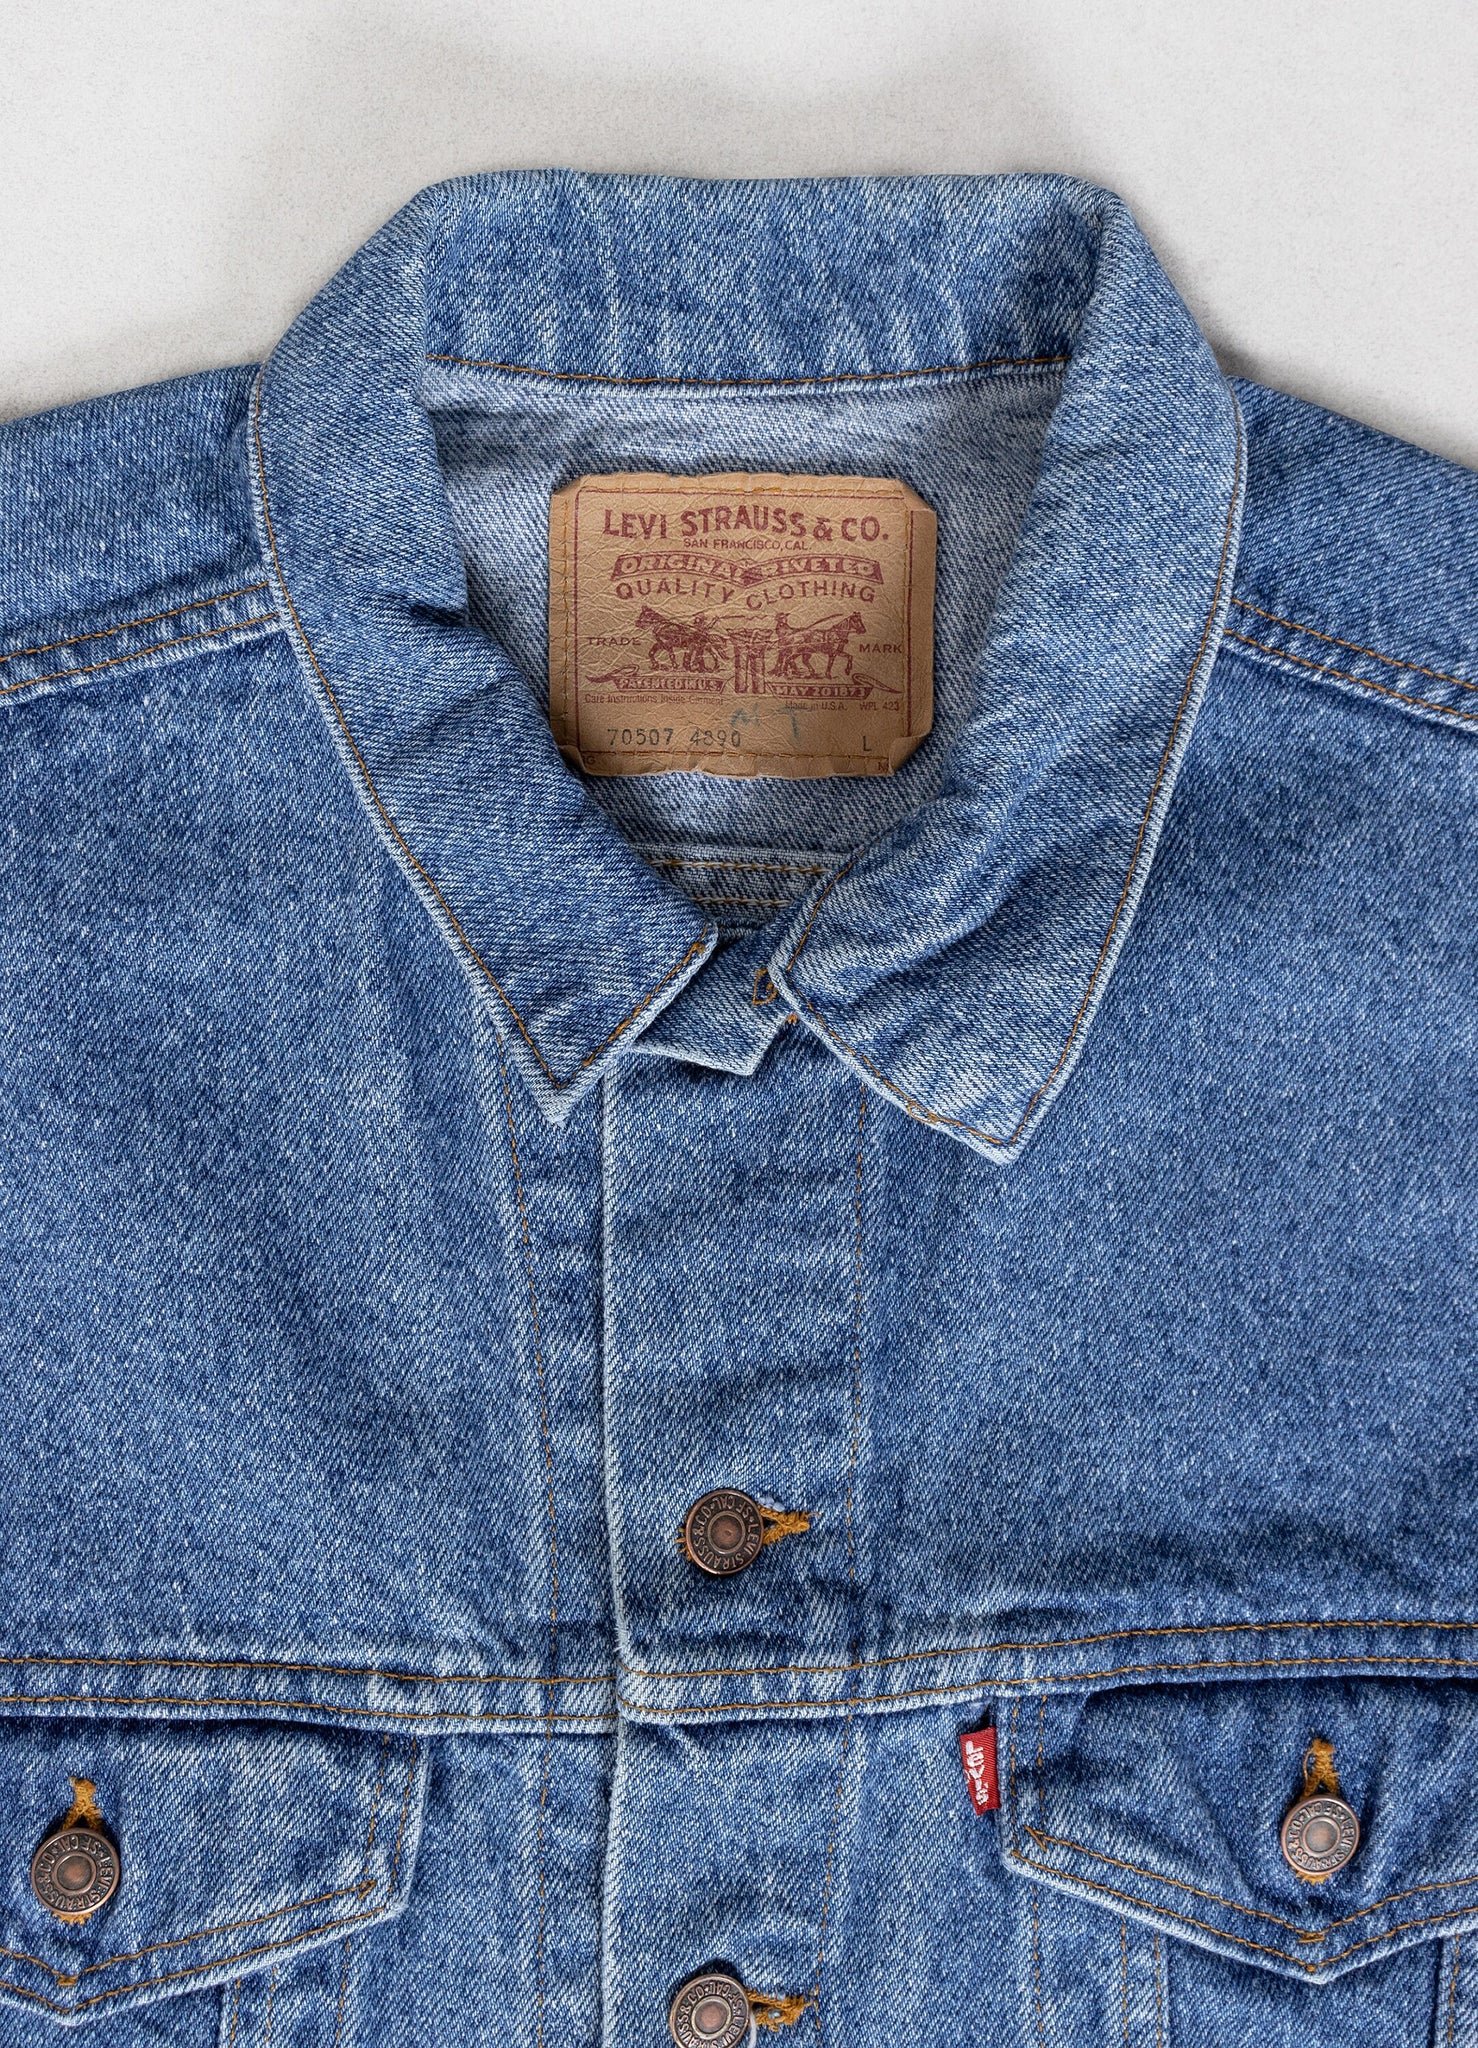 See why? Levi's